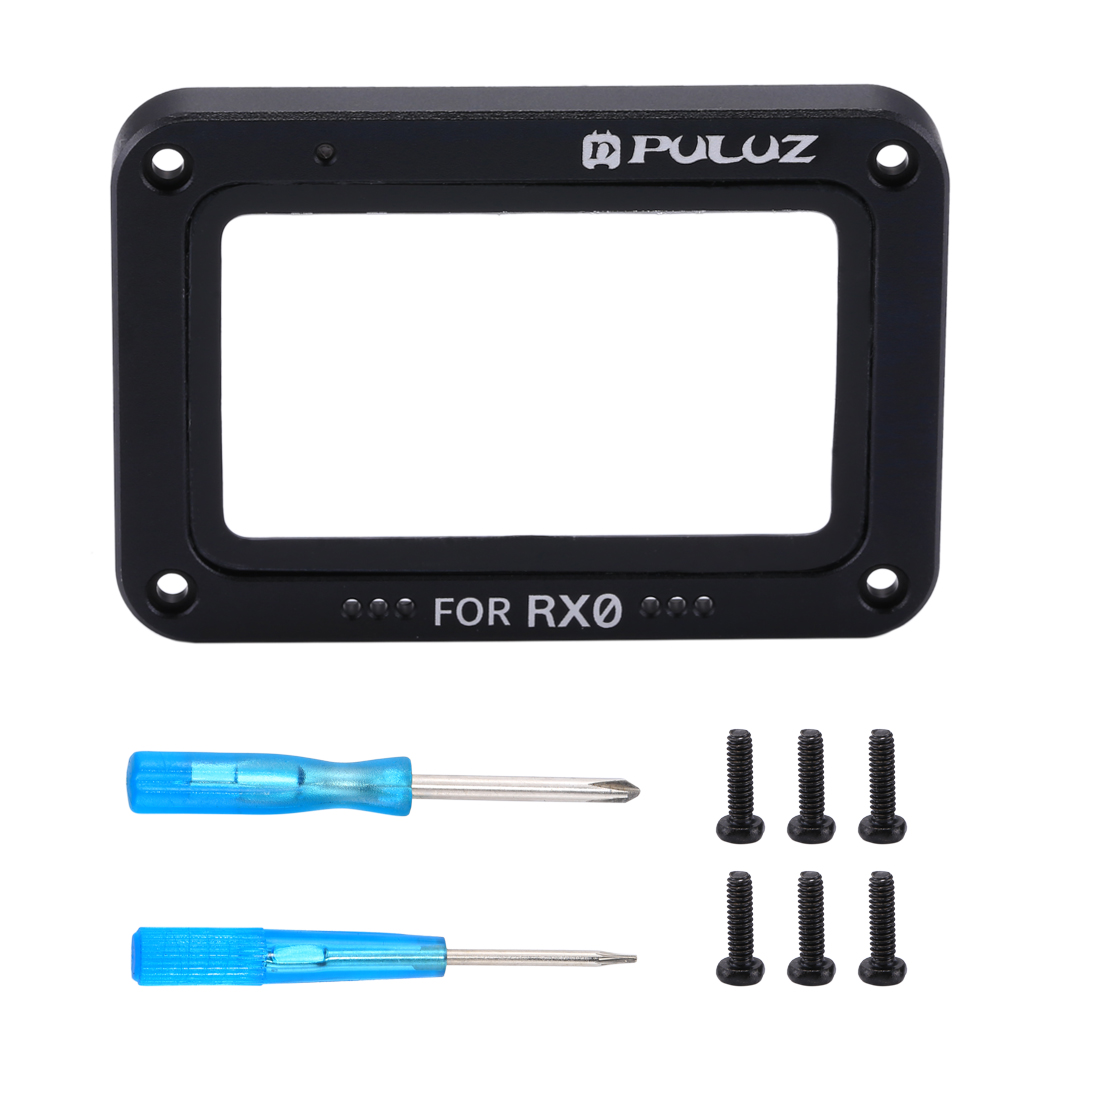 PULUZ PU318 Aluminum Alloy Frame Plus Tempered Glass Lens Protector for Sony RX0 with Screws